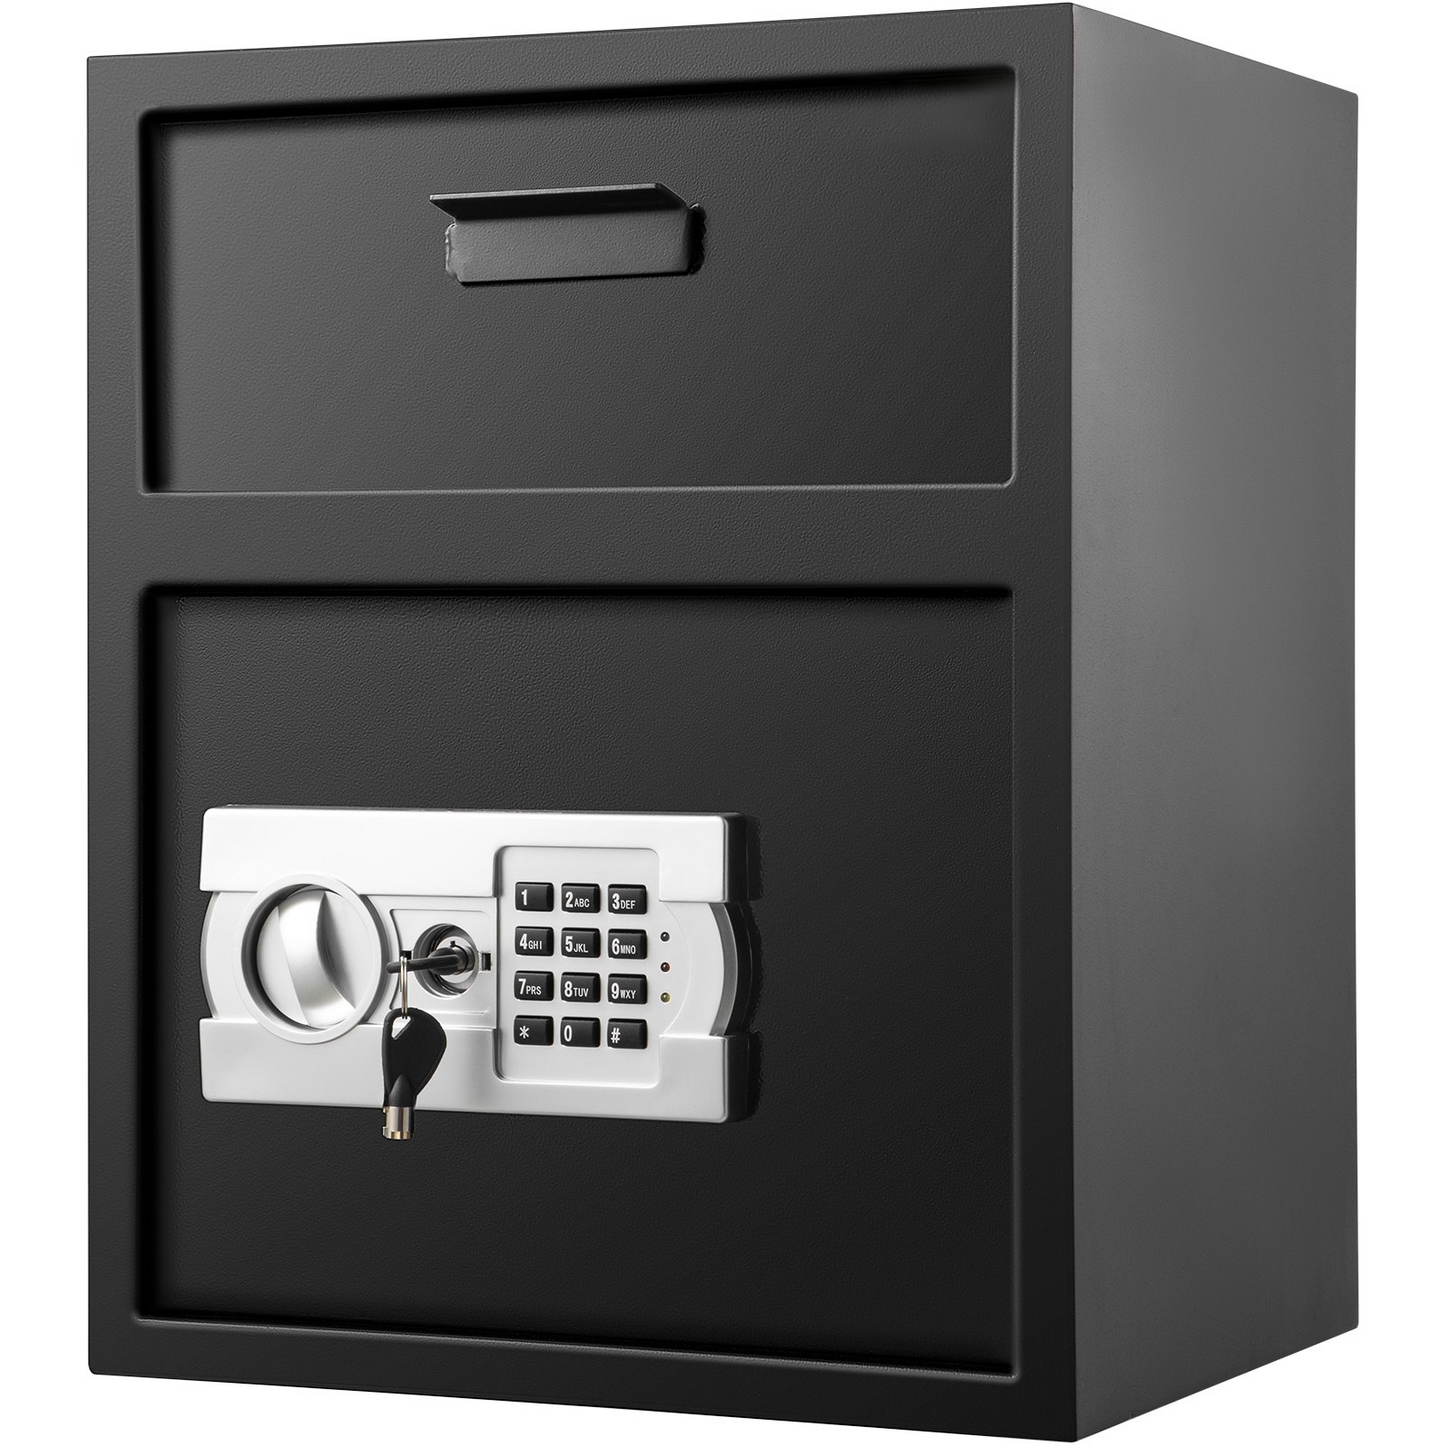 VEVOR Digital Depository Safe 1.7 Cubic Feet Made of Carbon Steel Electronic Code Lock Depository Safe with Deposit Slot with Two Emergency Keys Depository Box for Home Hotel Restaurant and Office, Goodies N Stuff